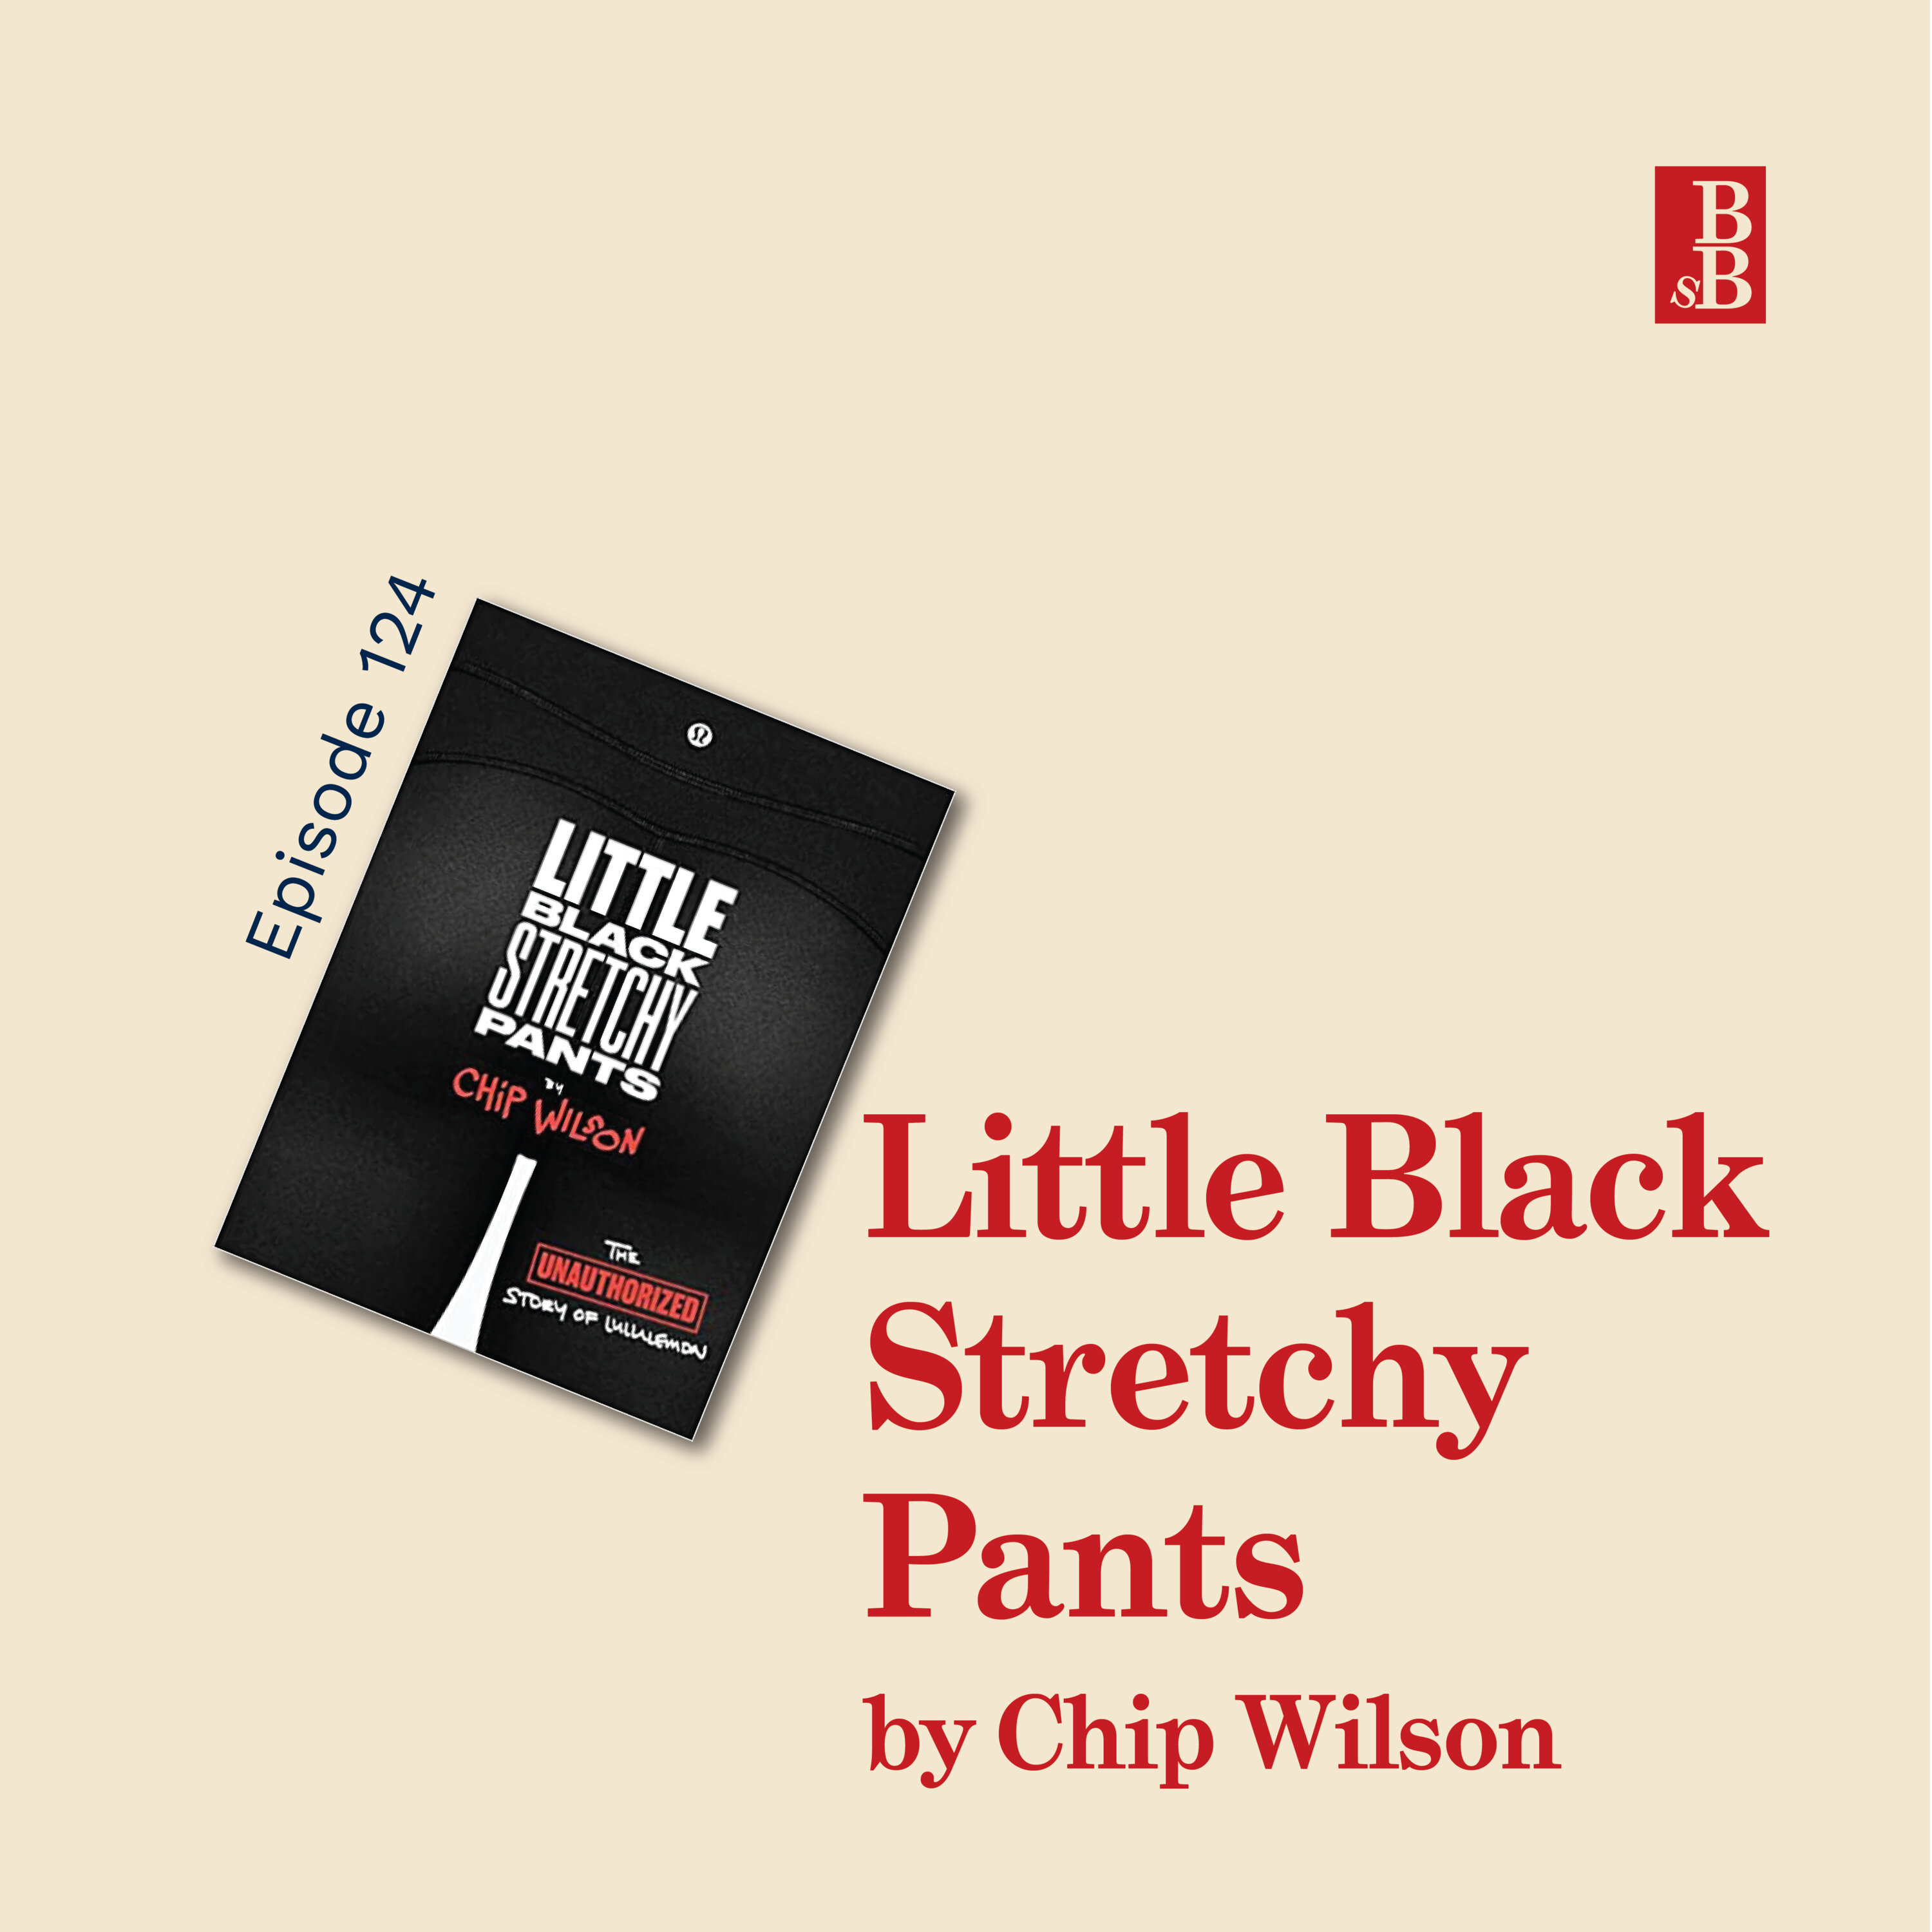 Little Black Stretchy Pants (The Unauthorised Story of Lululemon) by Chip Wilson; how to create a cult-like brand Image